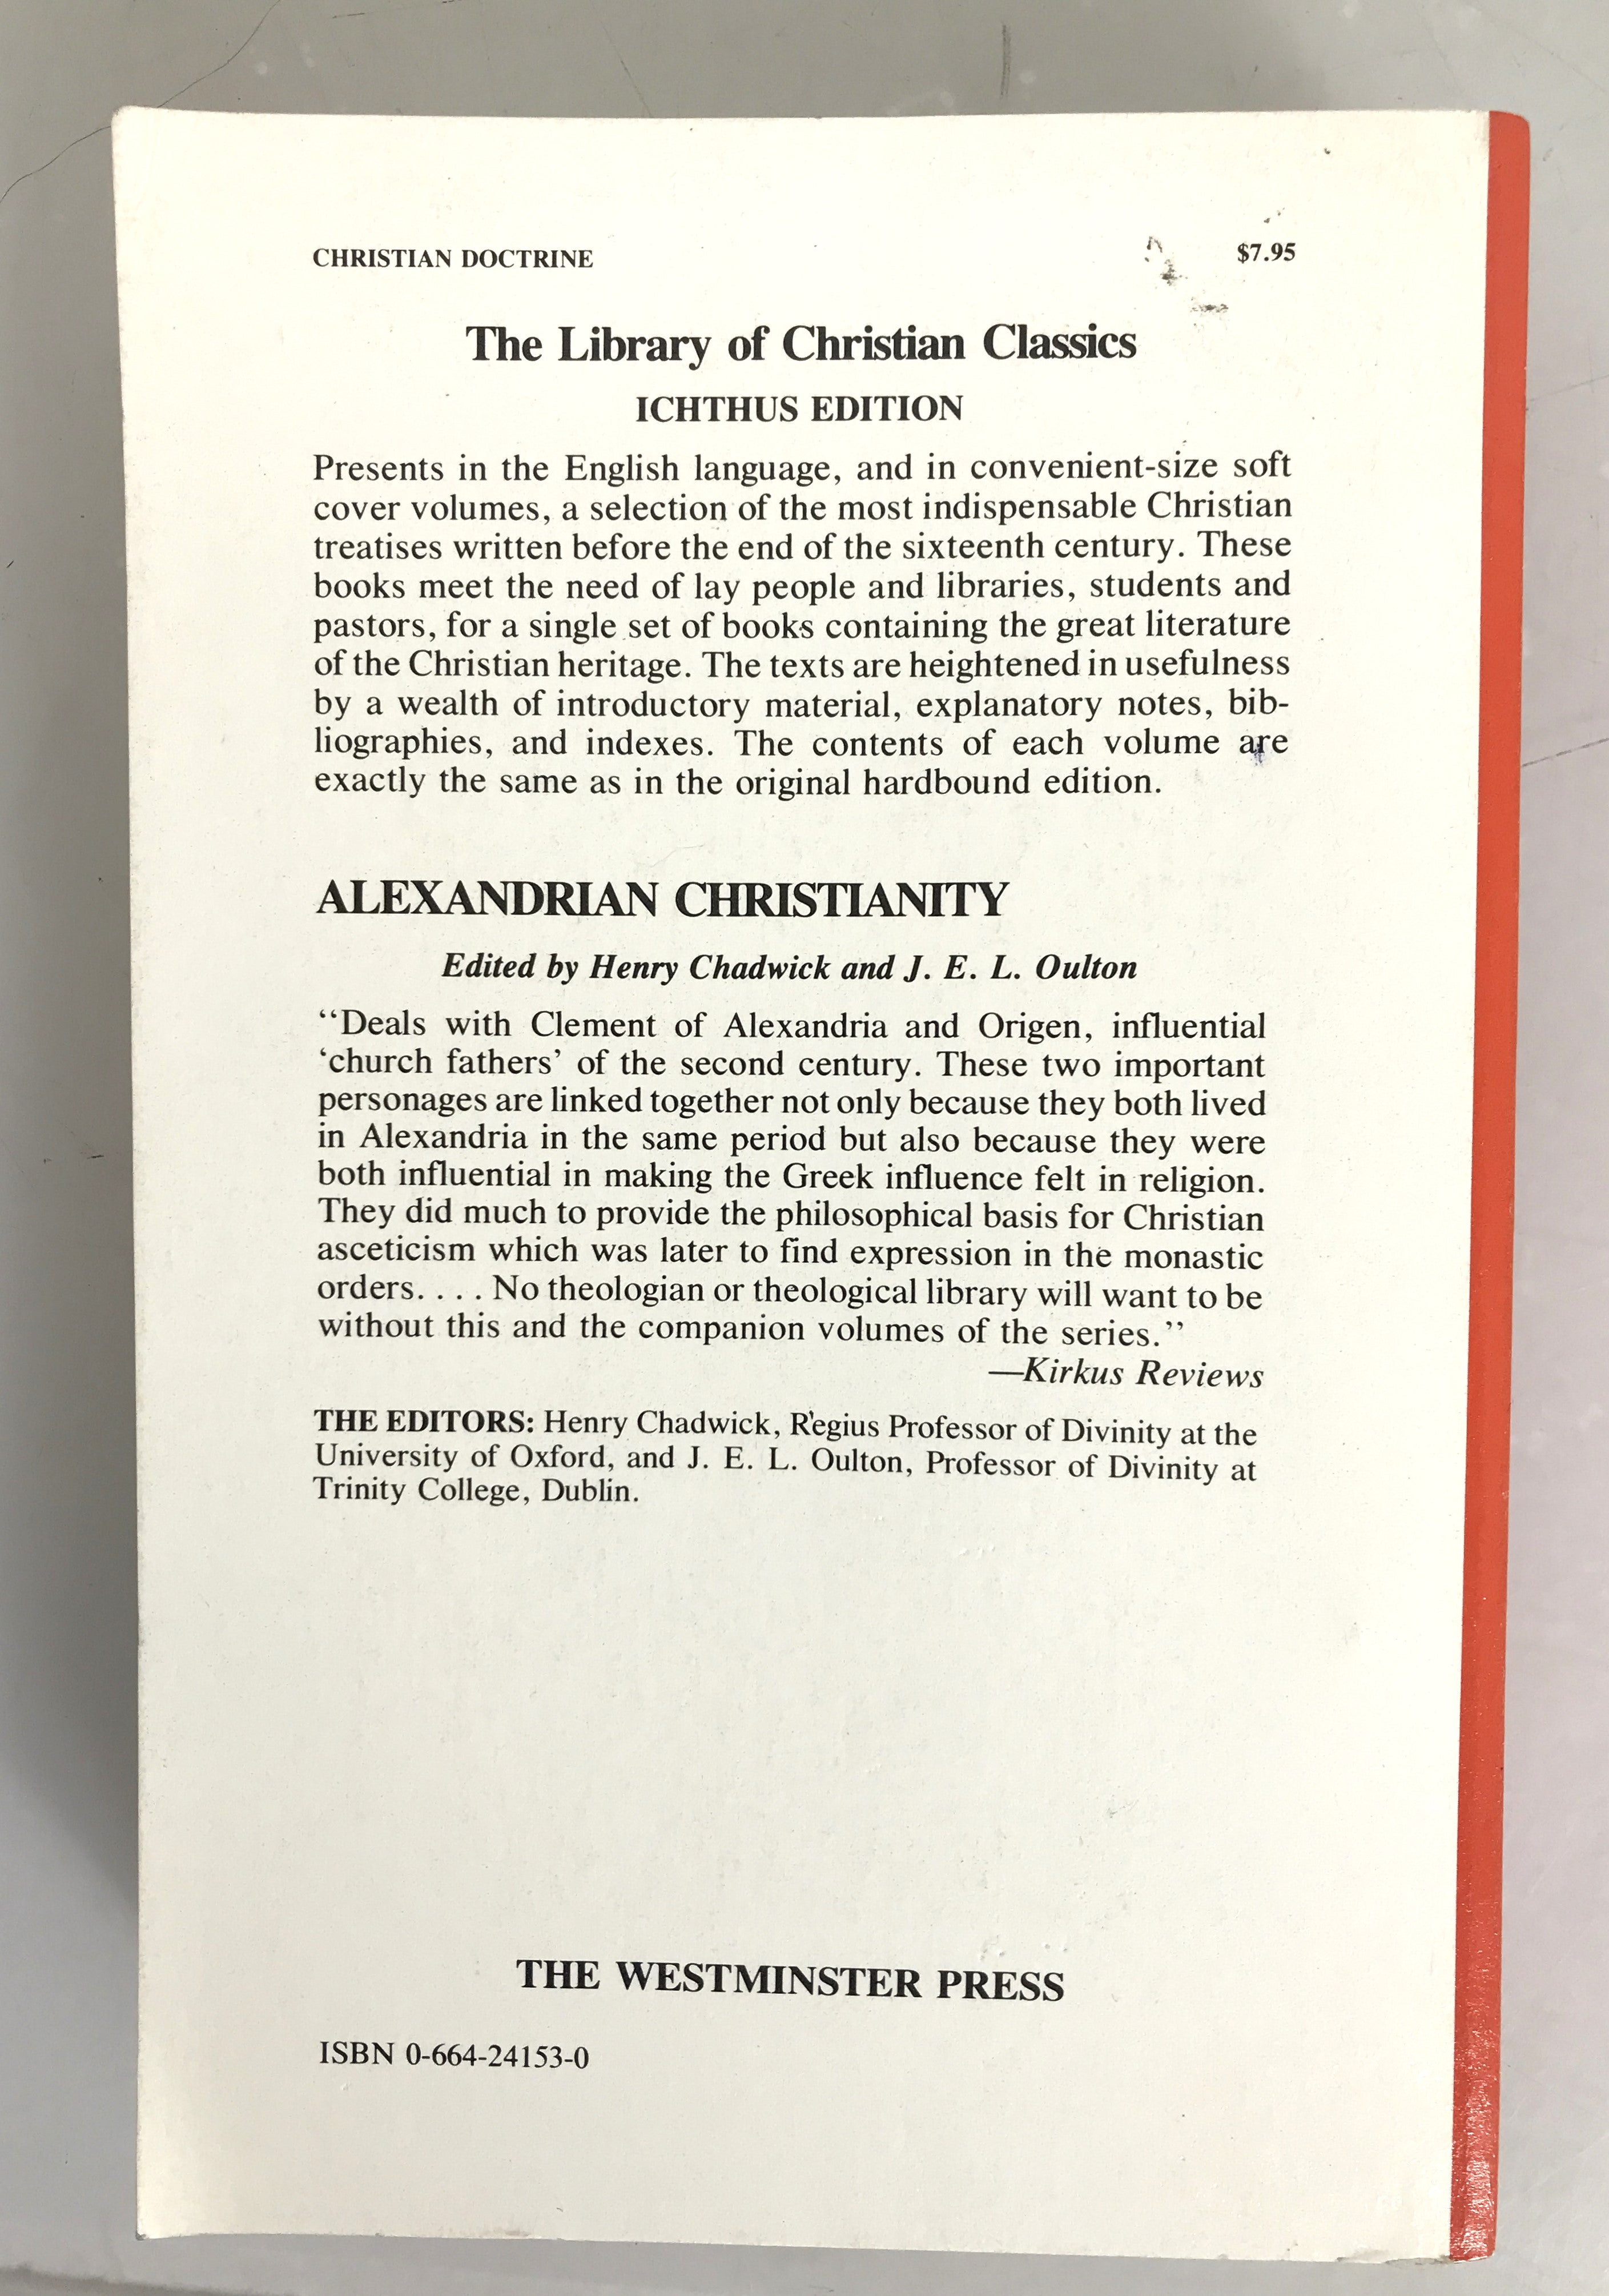 Alexandrian Christianity by Henry Chadwick First Edition 1954 SC - Icthus Edition